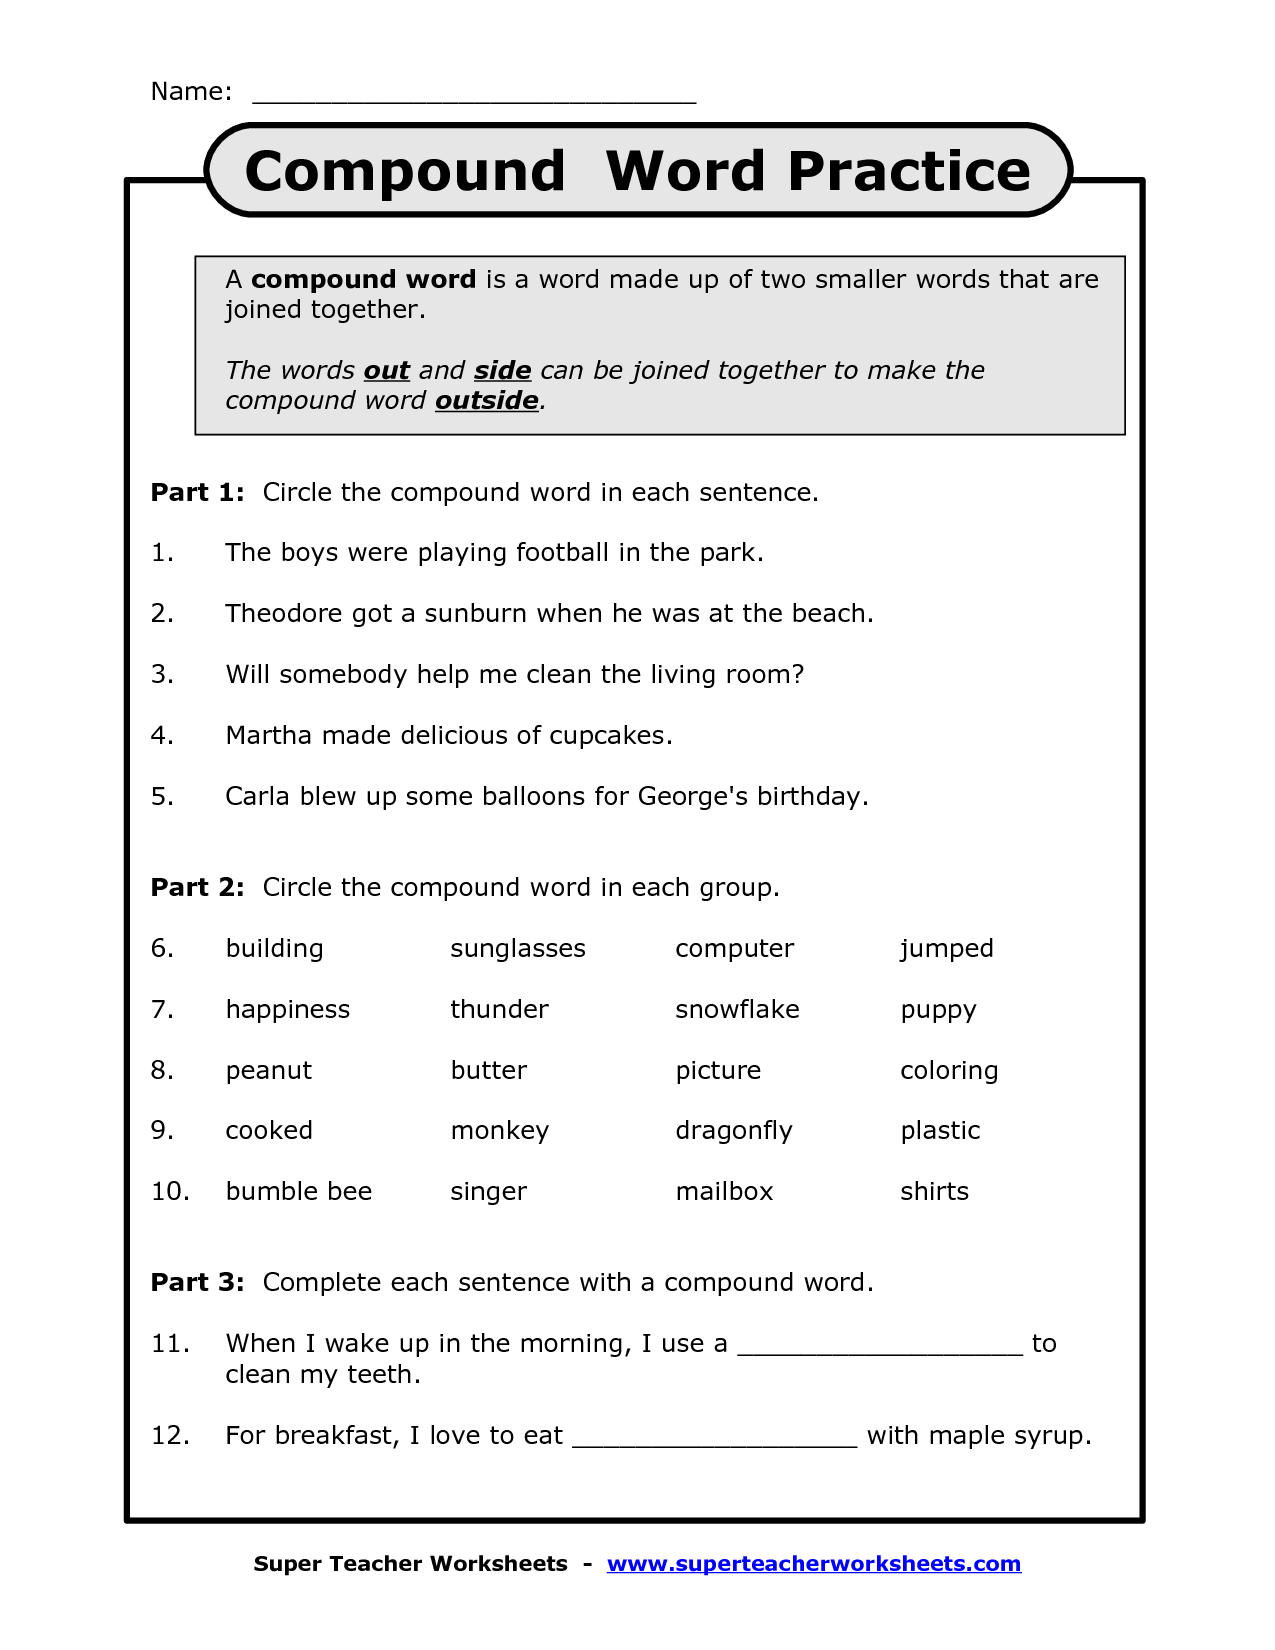 13-best-images-of-compound-words-worksheets-2nd-grade-compound-words-worksheets-printable